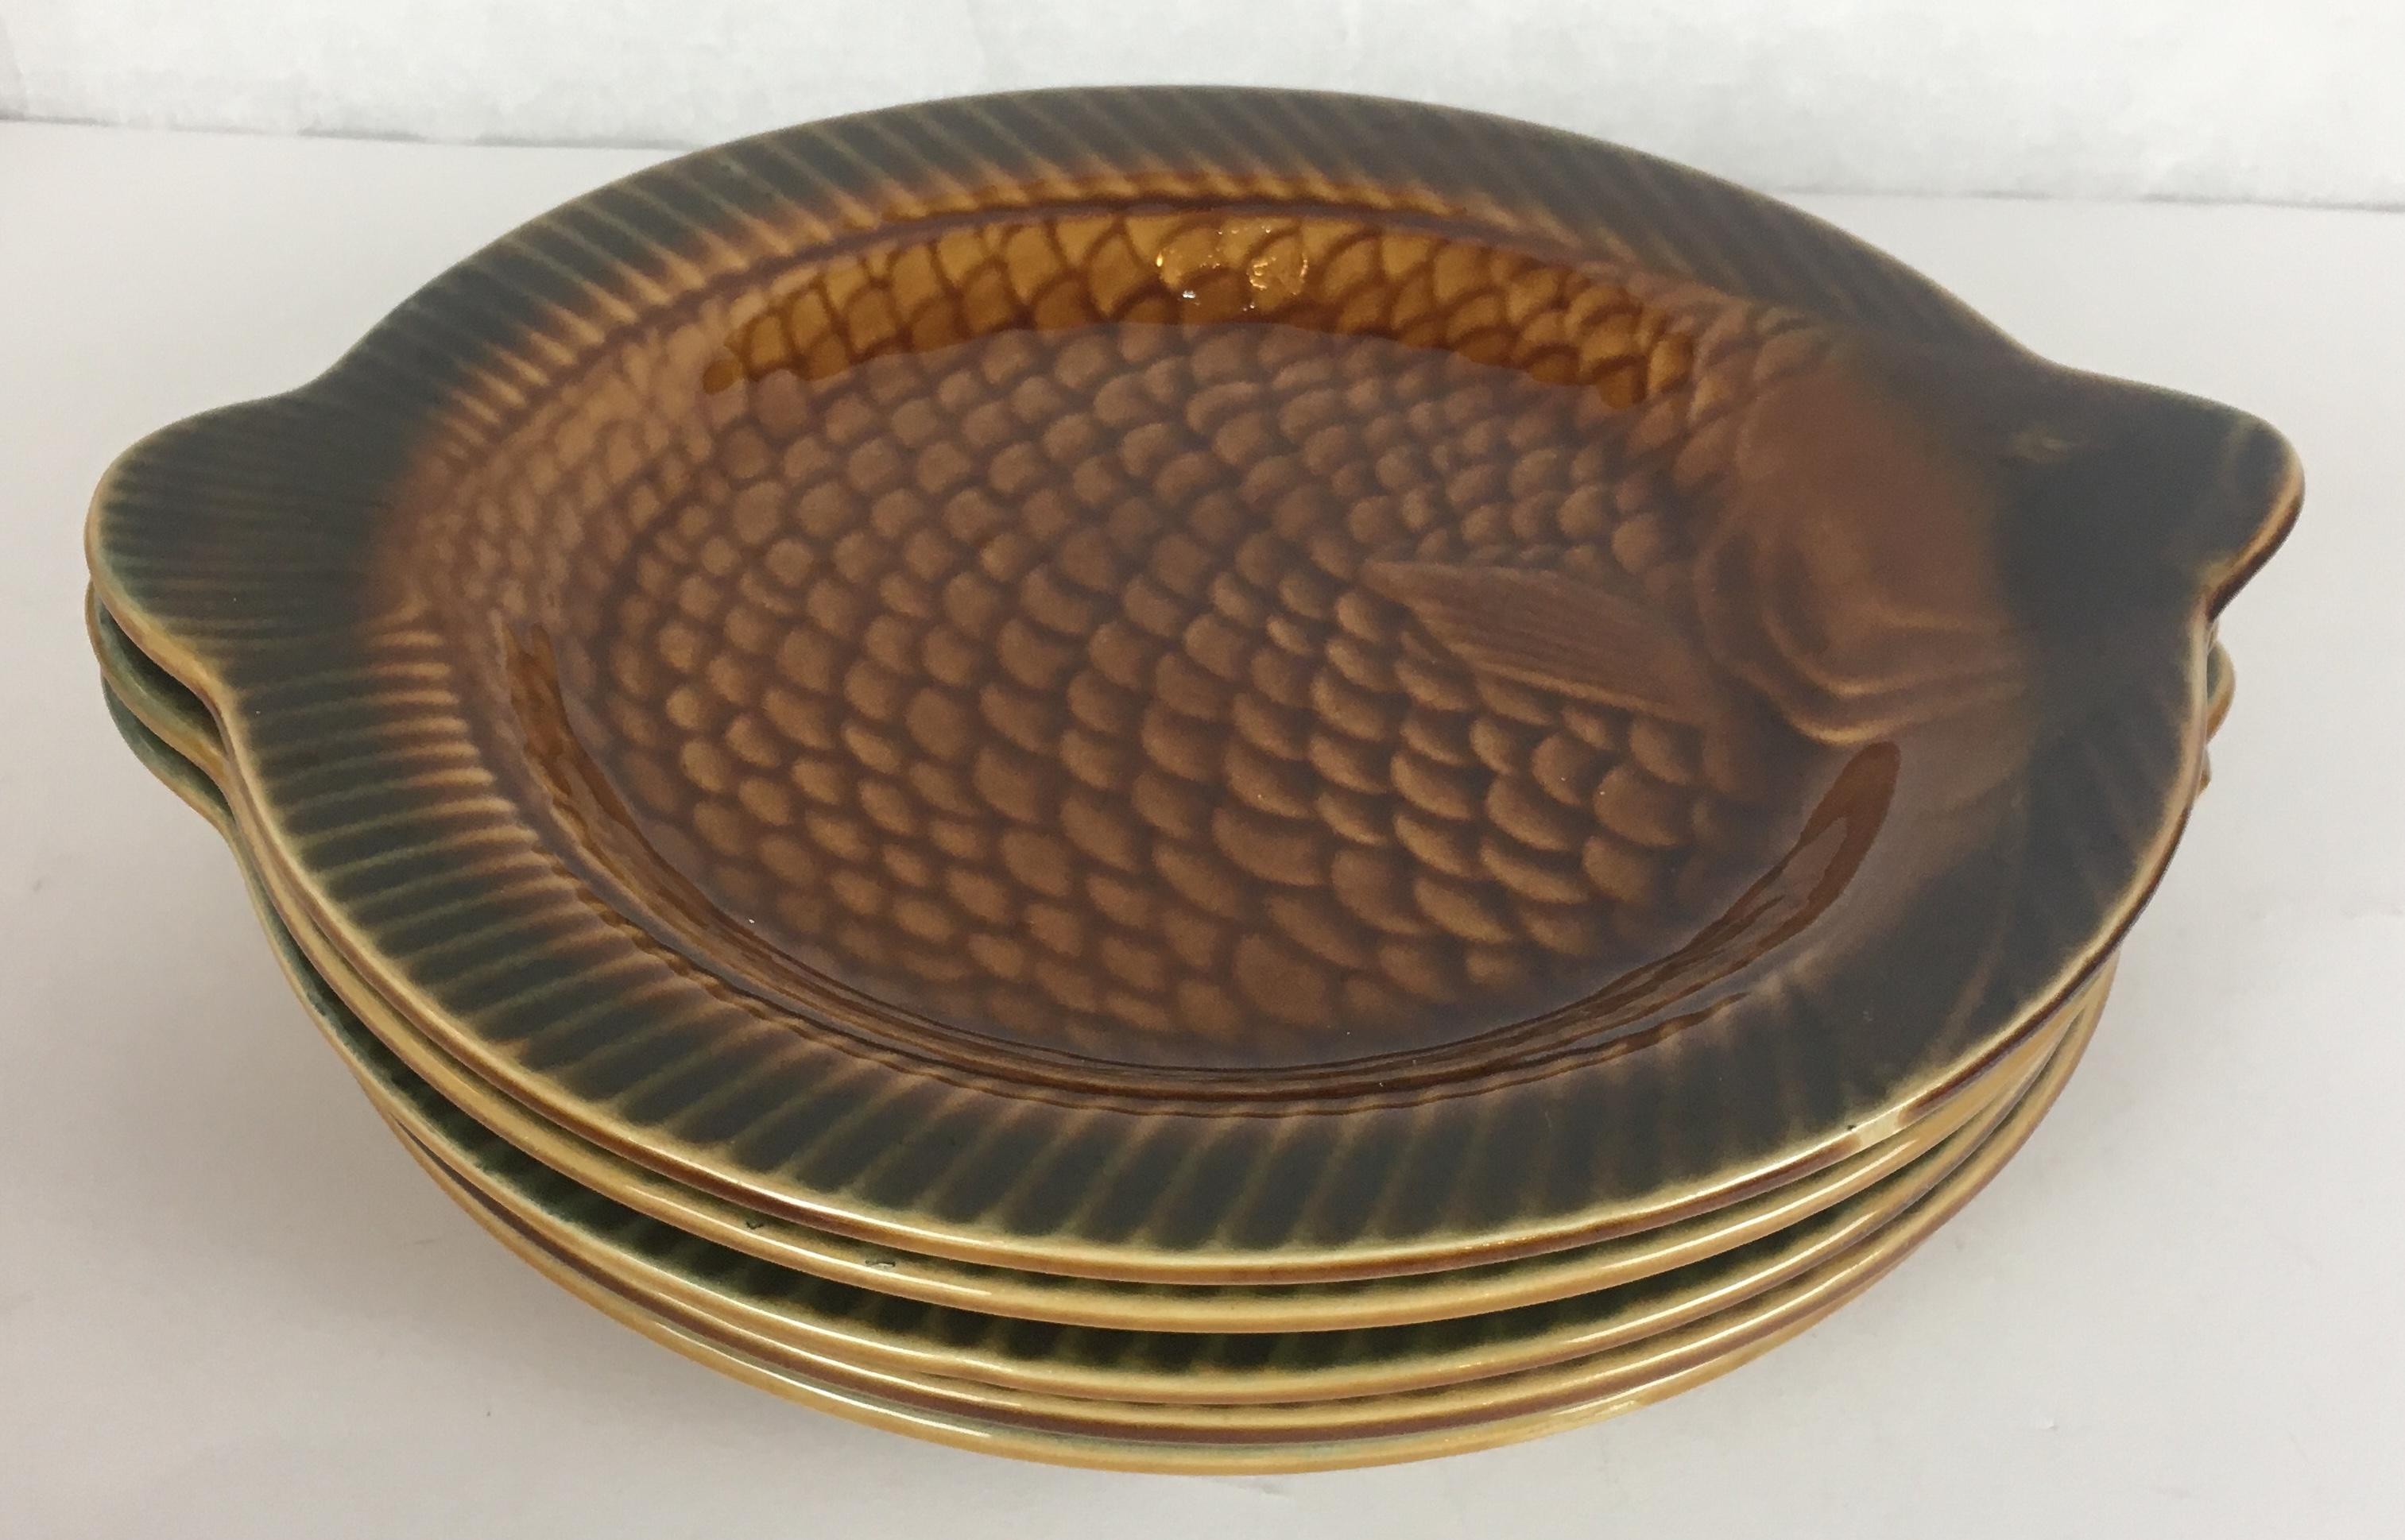 Glazed 14 Piece Sarreguemines Majolica Fish Plates, Bowls, Soup Tureen and Sauce Boat For Sale